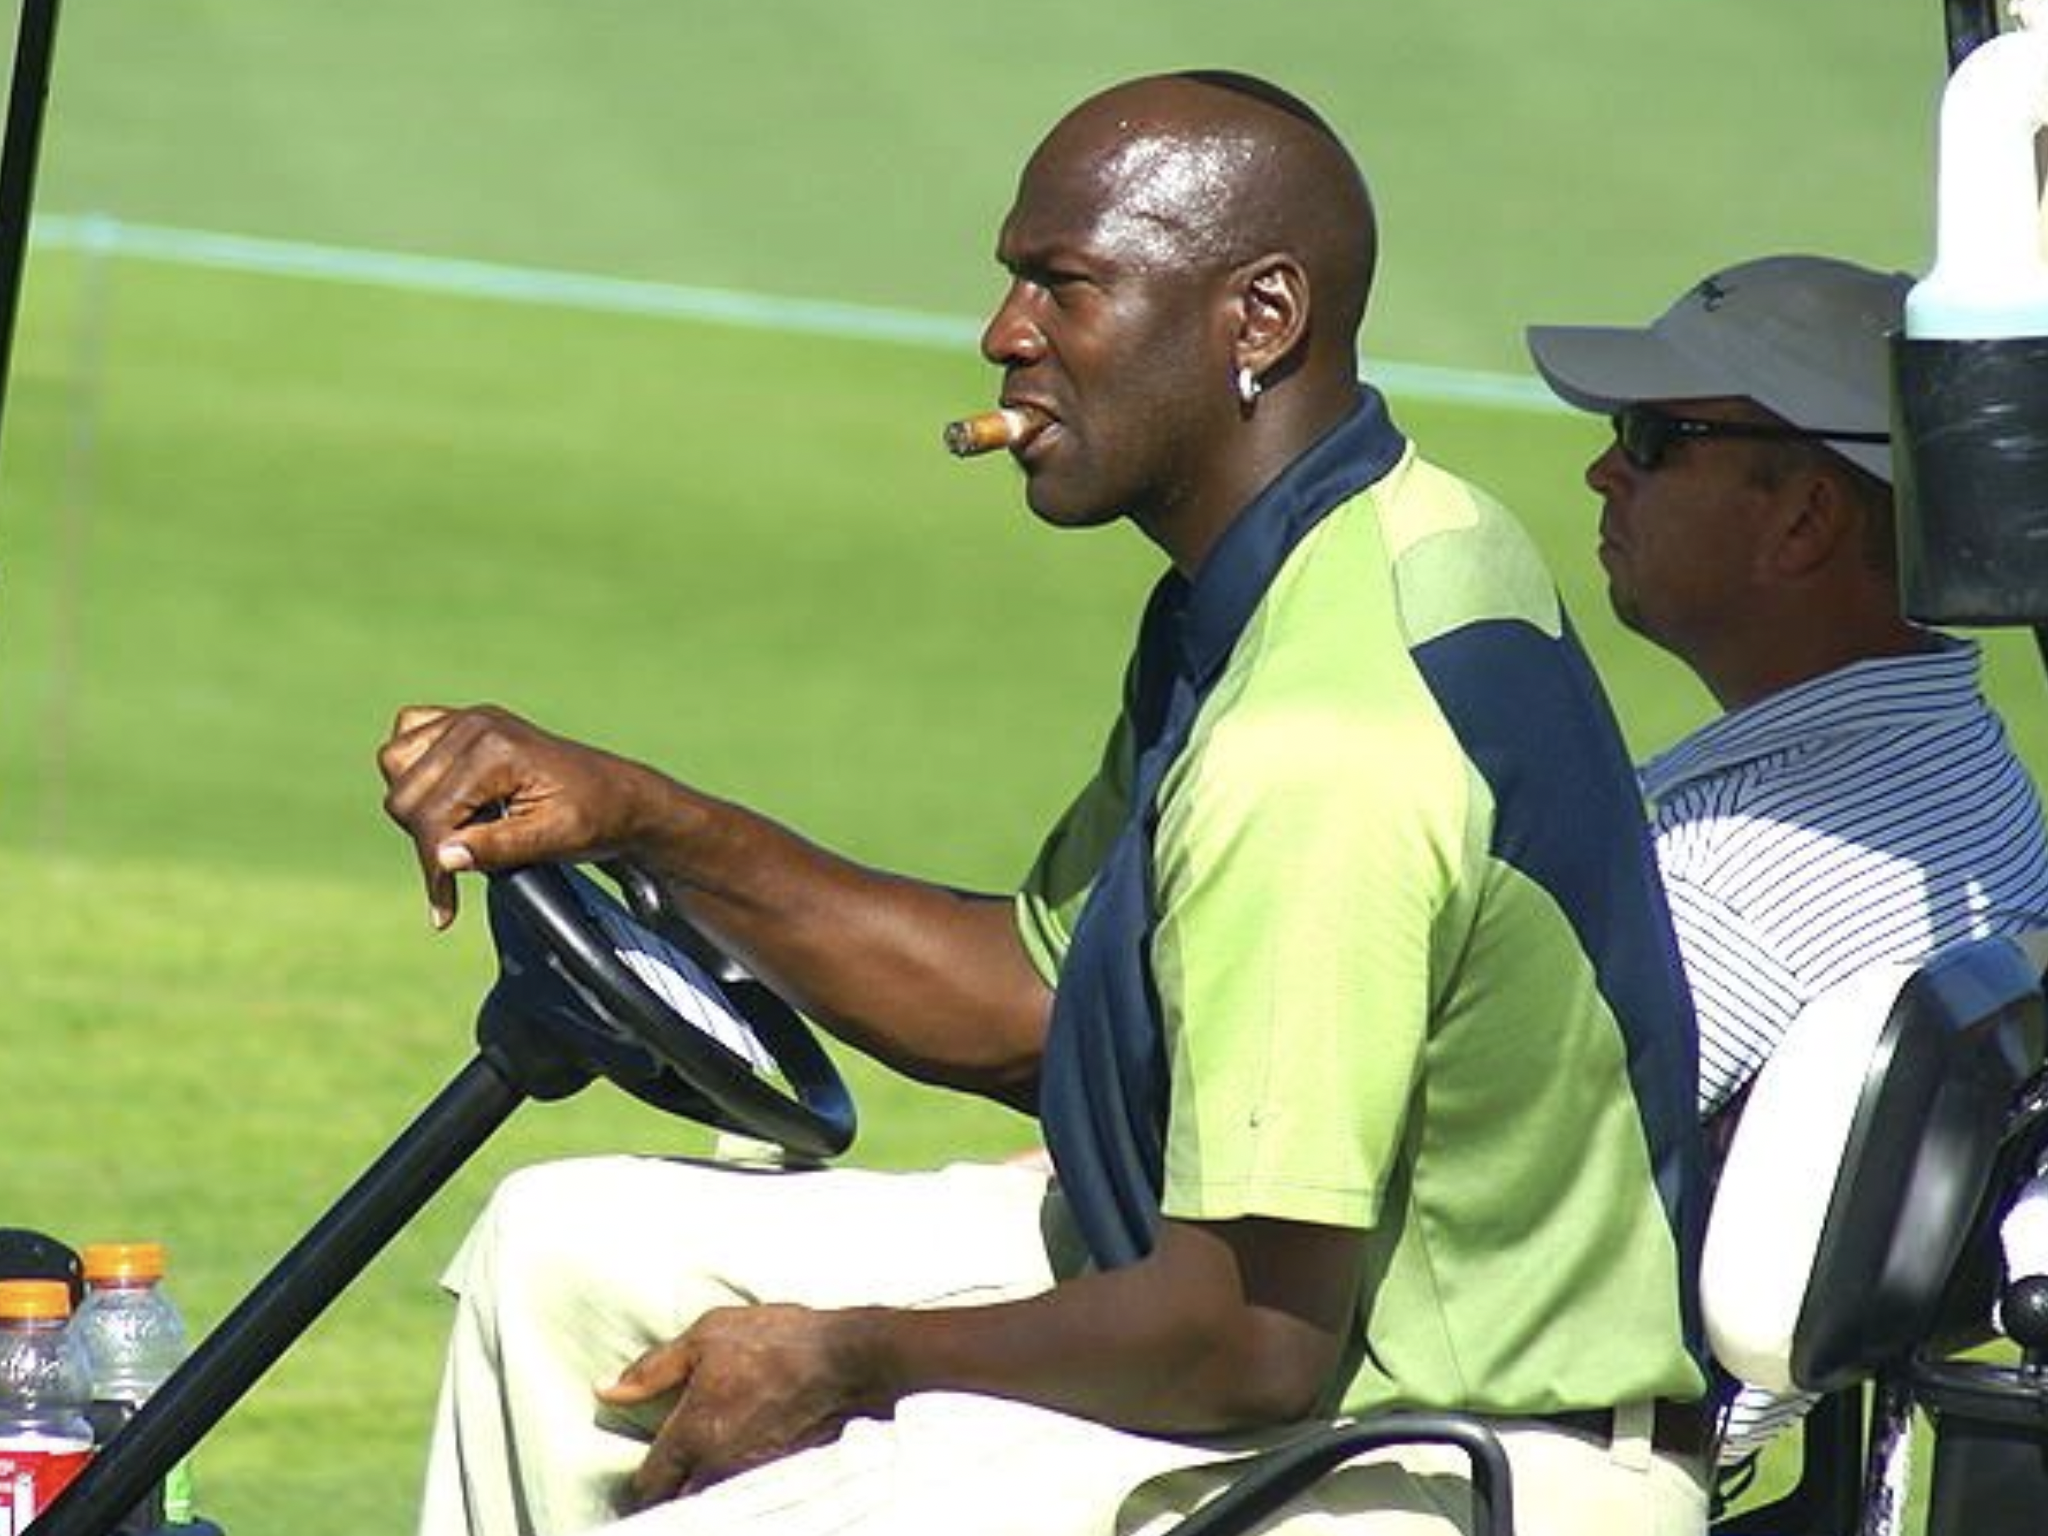 Michael Jordan has a golf course with less than 100 members